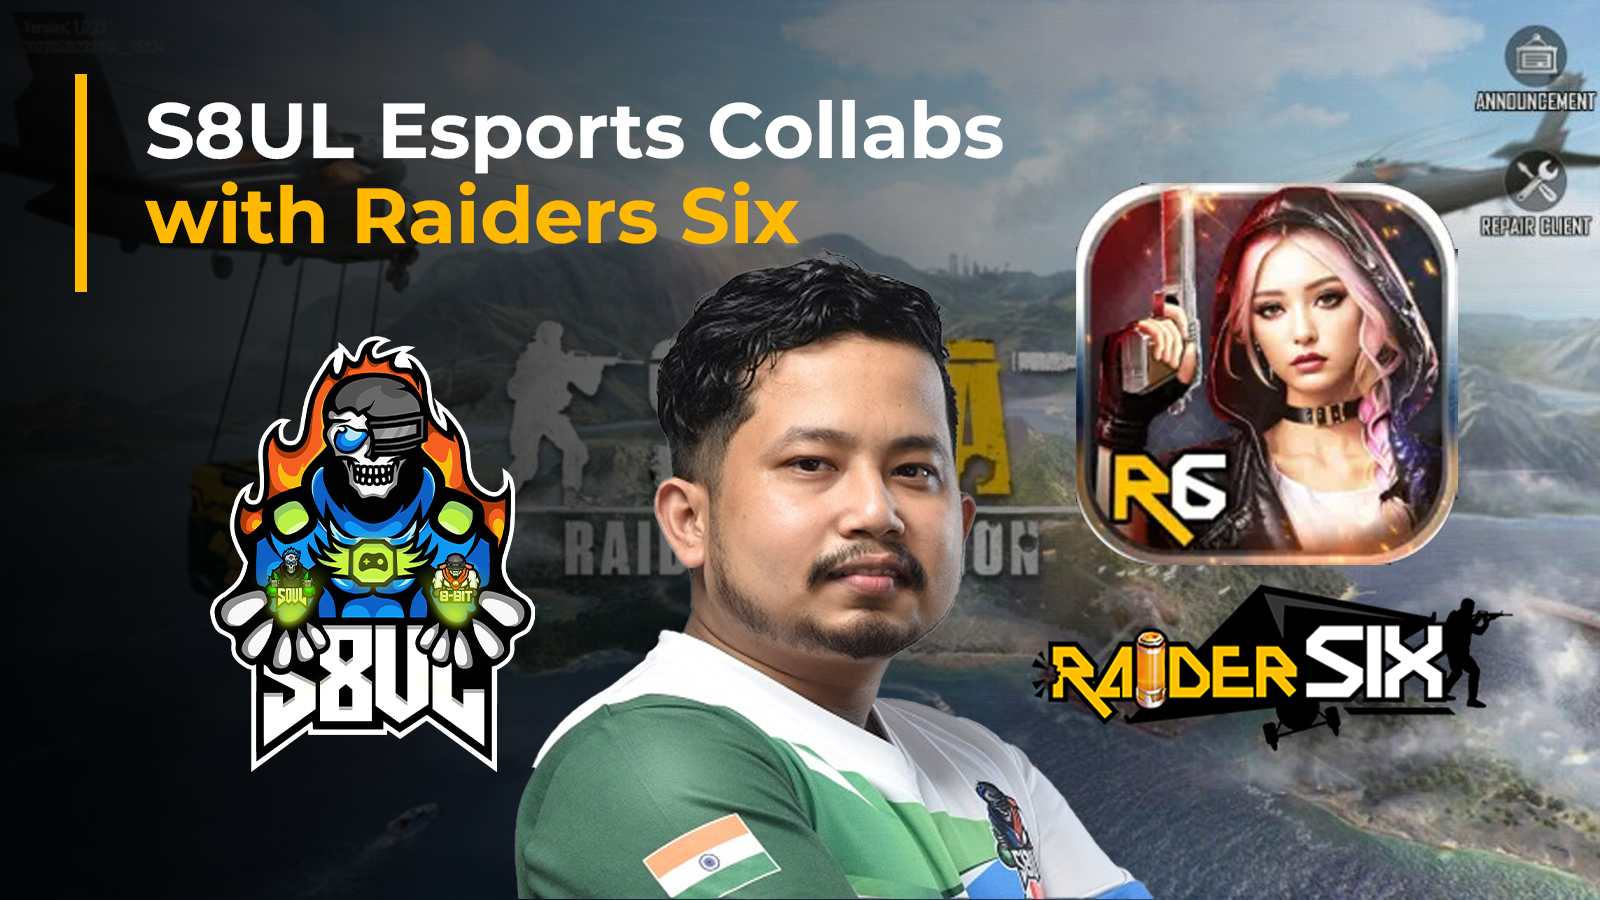 S8UL Esports and Raider Six Collaborate to Redefine Mobile Gaming Experience